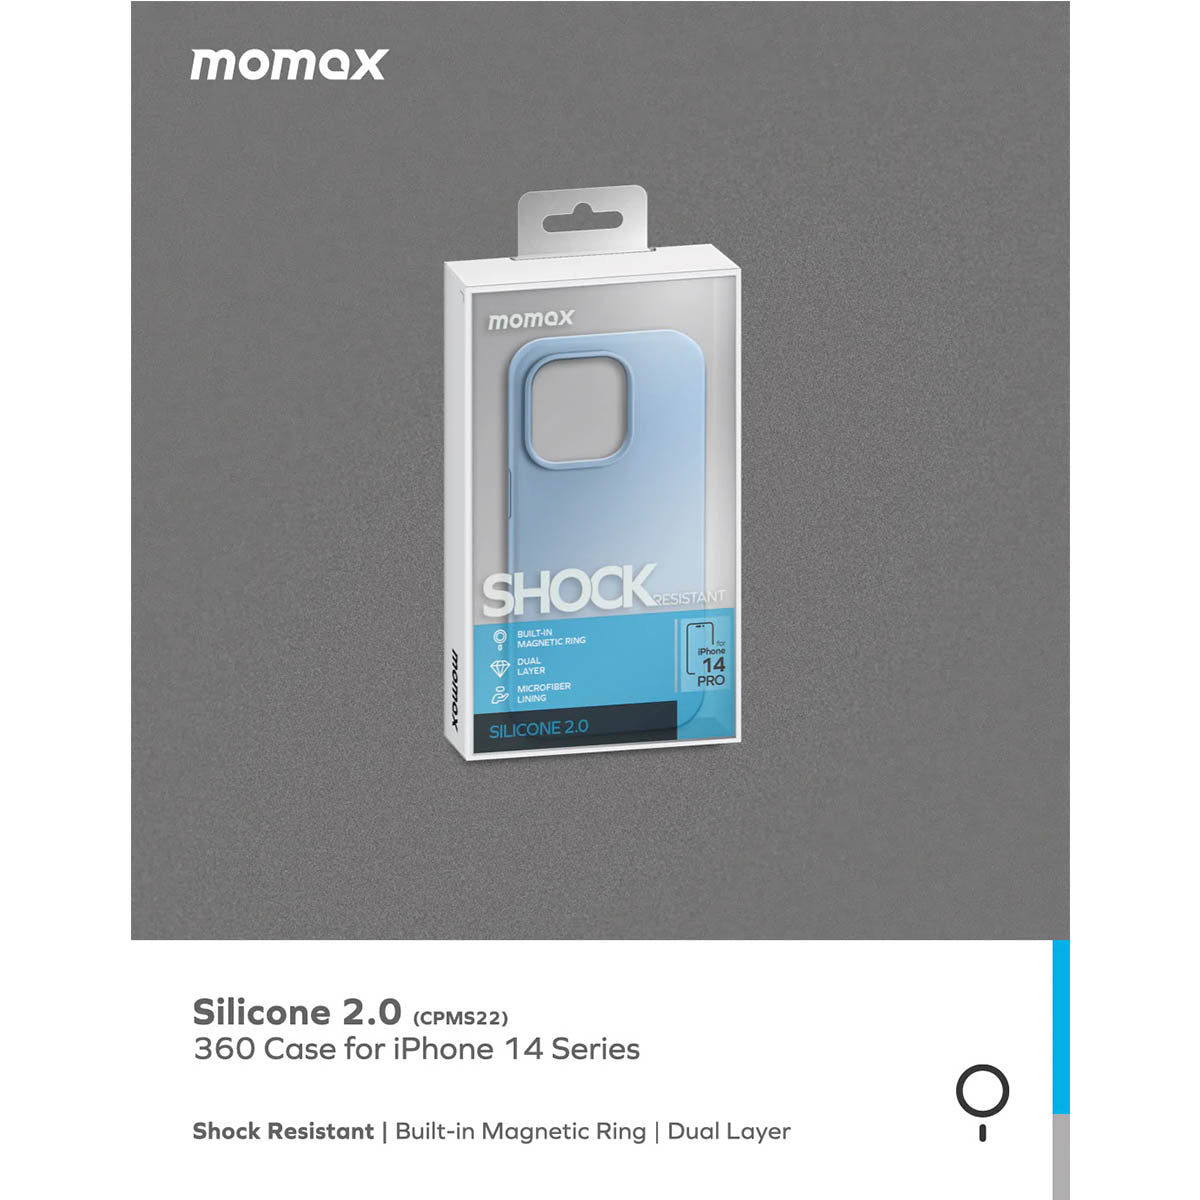 Momax Silicone 2.0 Case for iPhone 14 Series